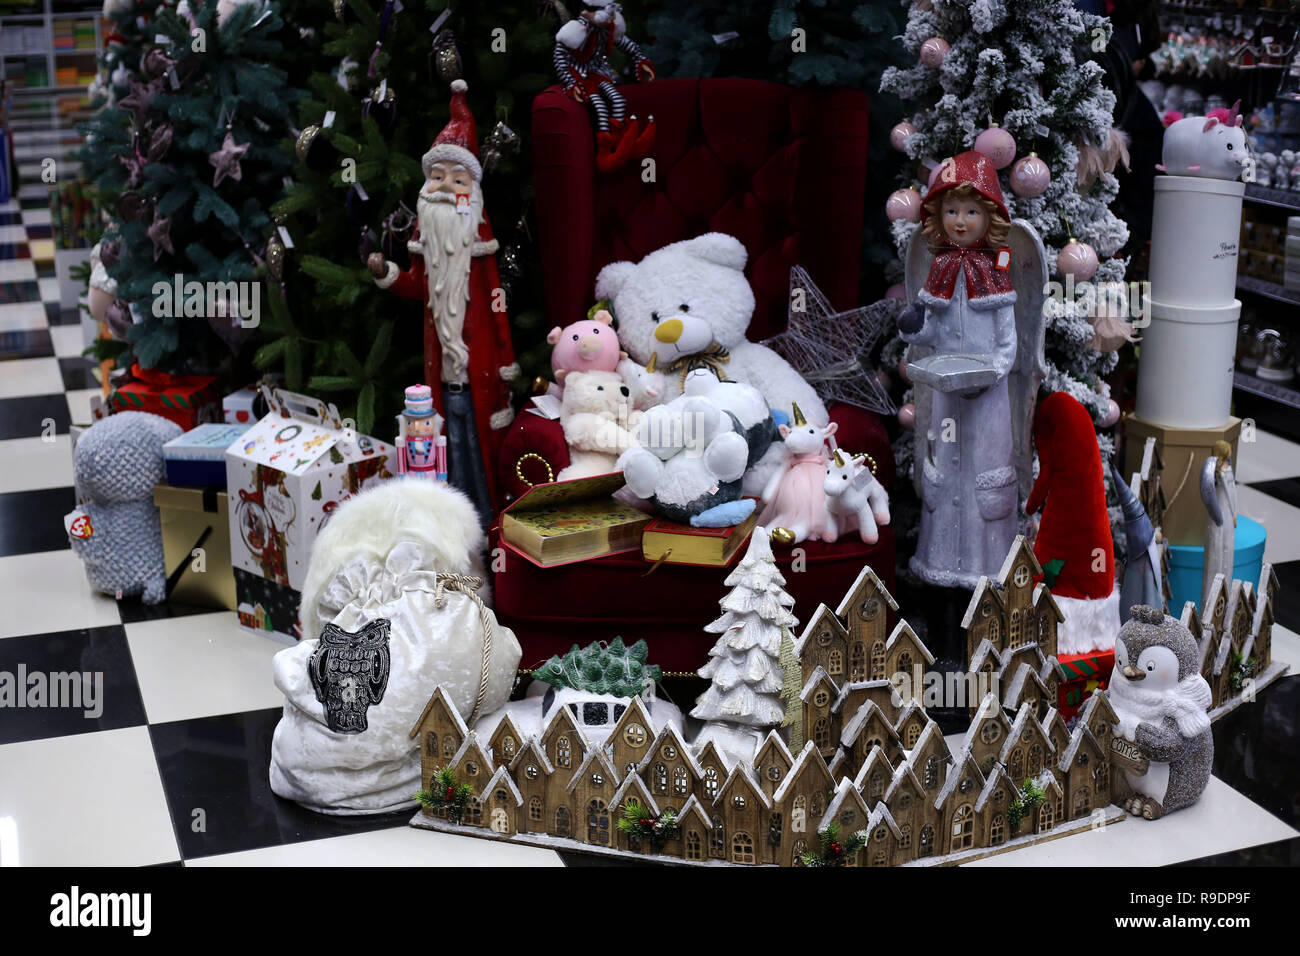 Kiev, kiev, Ukraine. 22nd Dec, 2018. Christmas toys seen on sale in a mall during the festive season. Accessories of Christmas were seen in different place like barbershops and malls in Kiev Ukraine Credit: Mohammad Javad Abjoushak/SOPA Images/ZUMA Wire/Alamy Live News Stock Photo